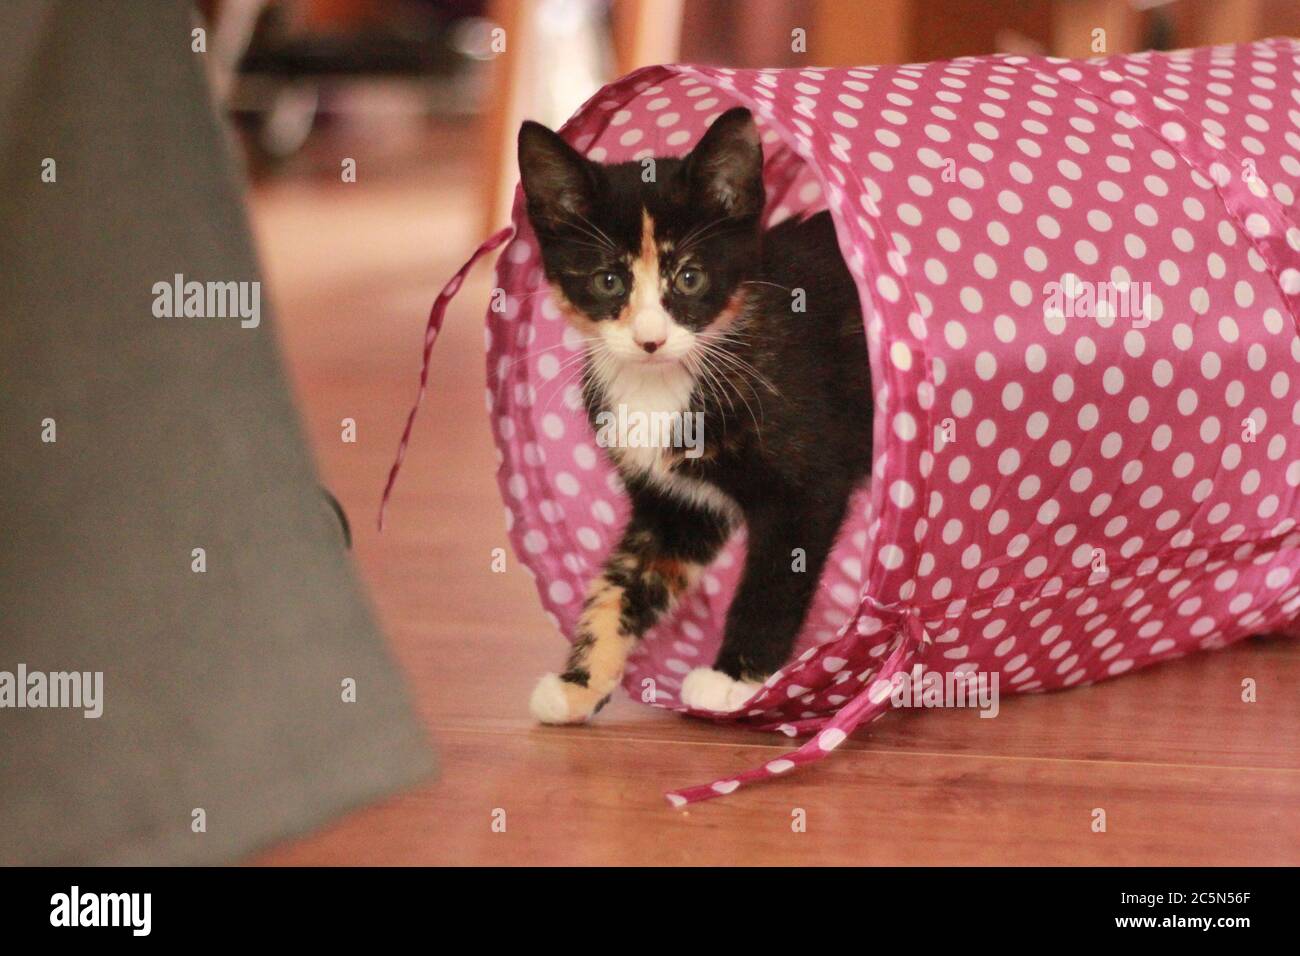 Tortoiseshell/calico kitten walking out of a play tunnel. Stock Photo